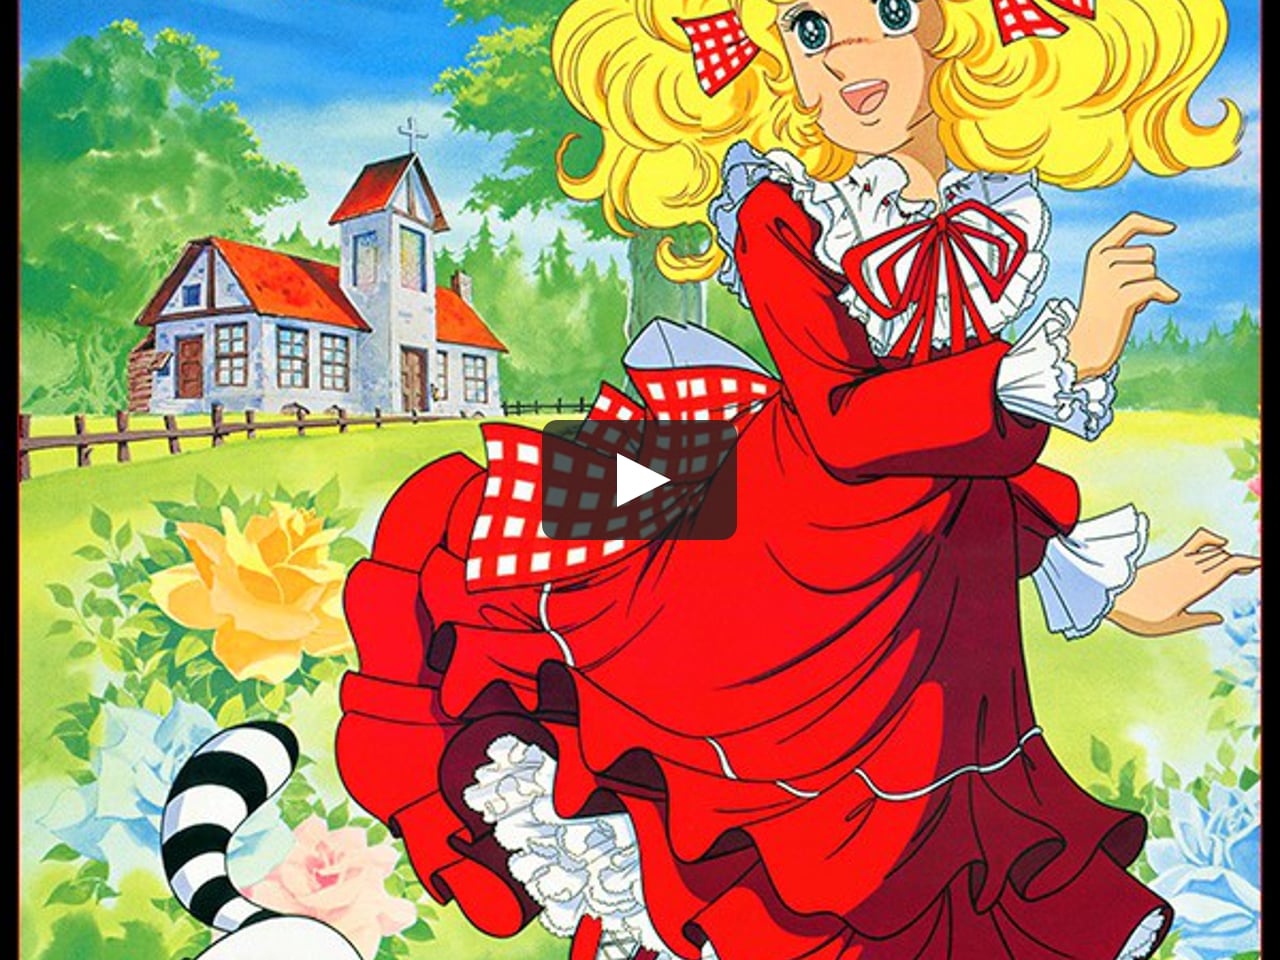 Candy Candy Capitulo 1 on Vimeo